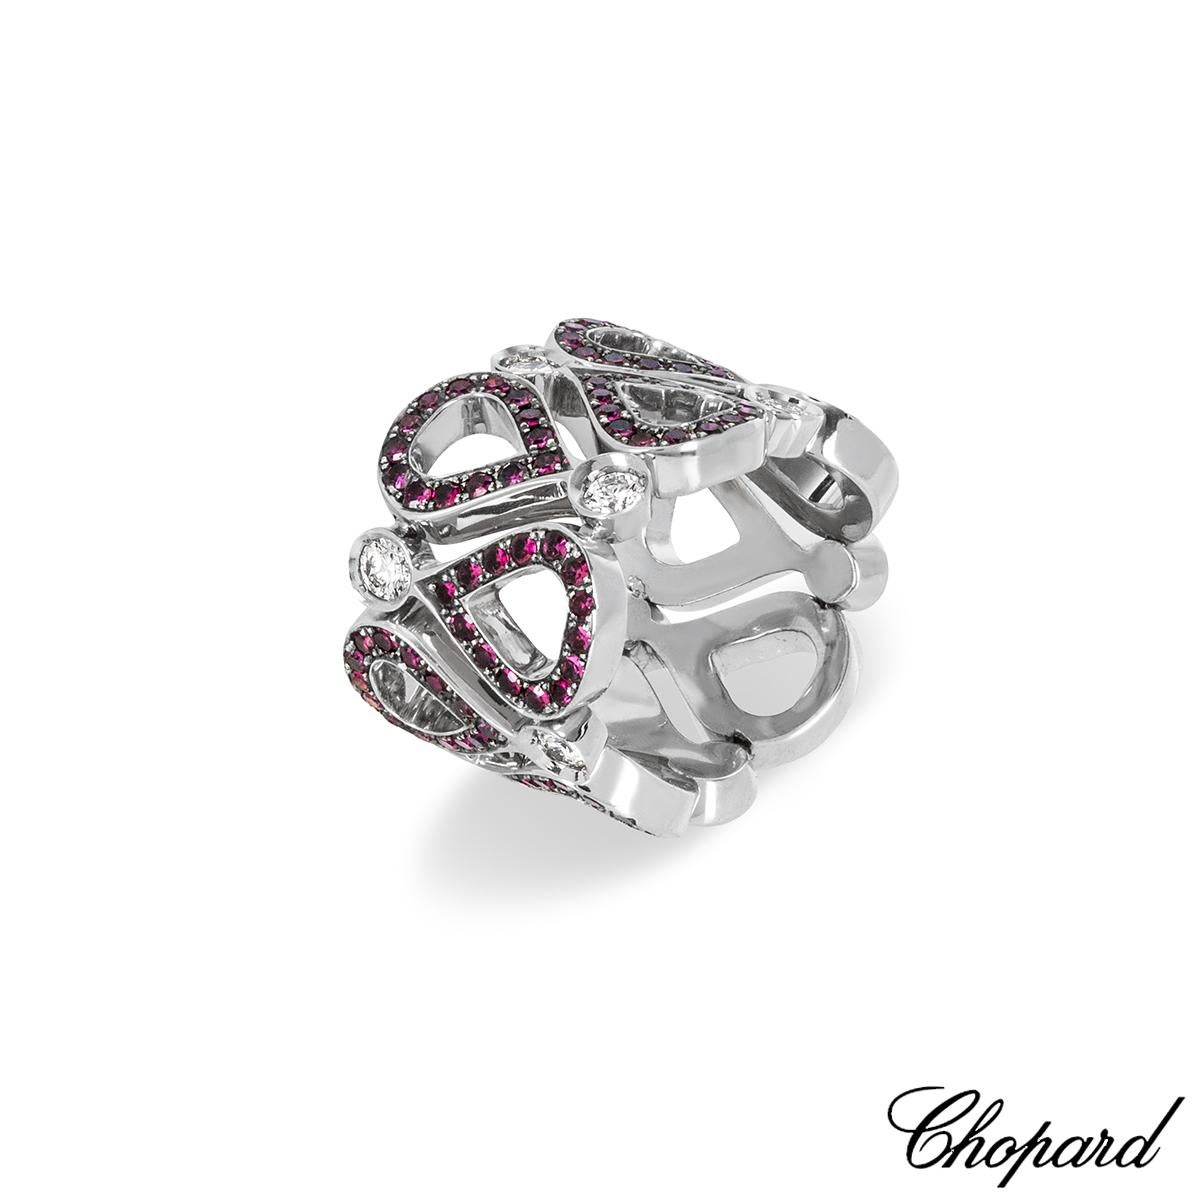 A chic 18k white gold ruby and diamond Chopard Pushkin ring. The ring features the Pushkin design pave set with 126 round cut rubies with an approximate weight of 1.28ct and displaying a deep pinkish-red hue. Bezel set to the points of the rubies